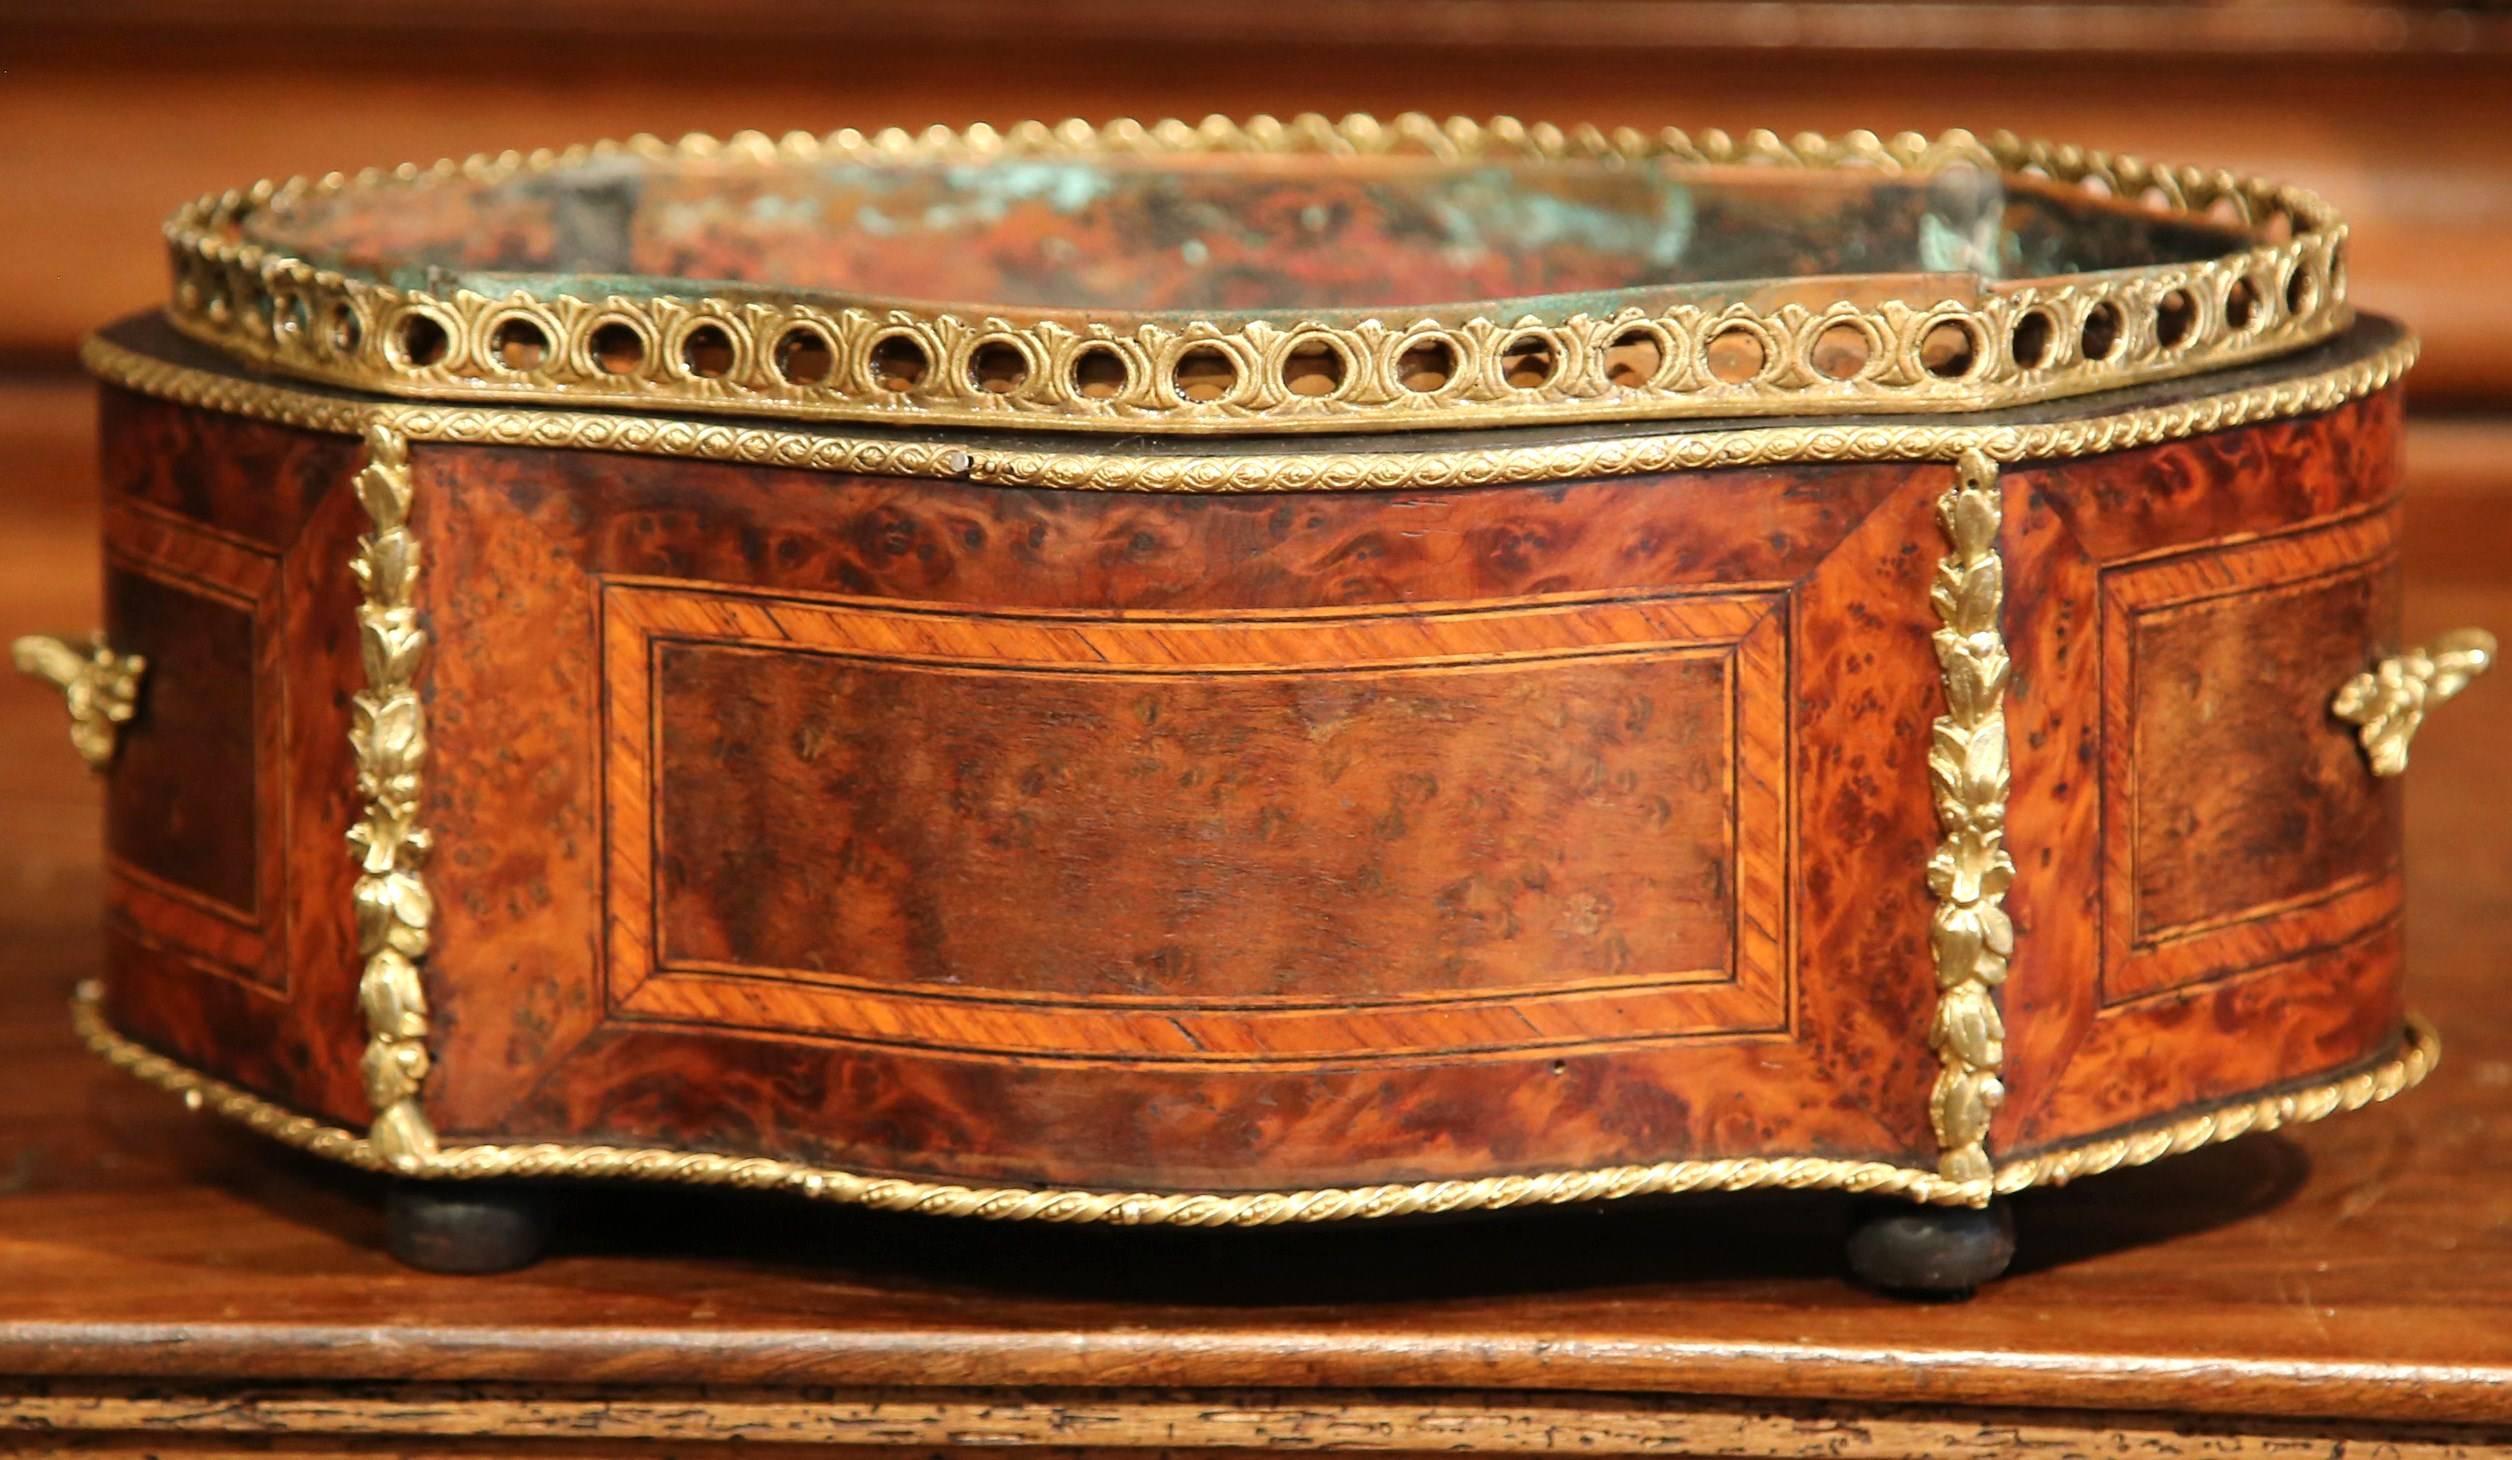 This elegant, antique Napoleon III planter was crafted in France, circa 1870. The oval rosewood jardinière with bronze gallery at the top, features marquetry geometric designs on all four sides, and is further embellished with bronze mounts and